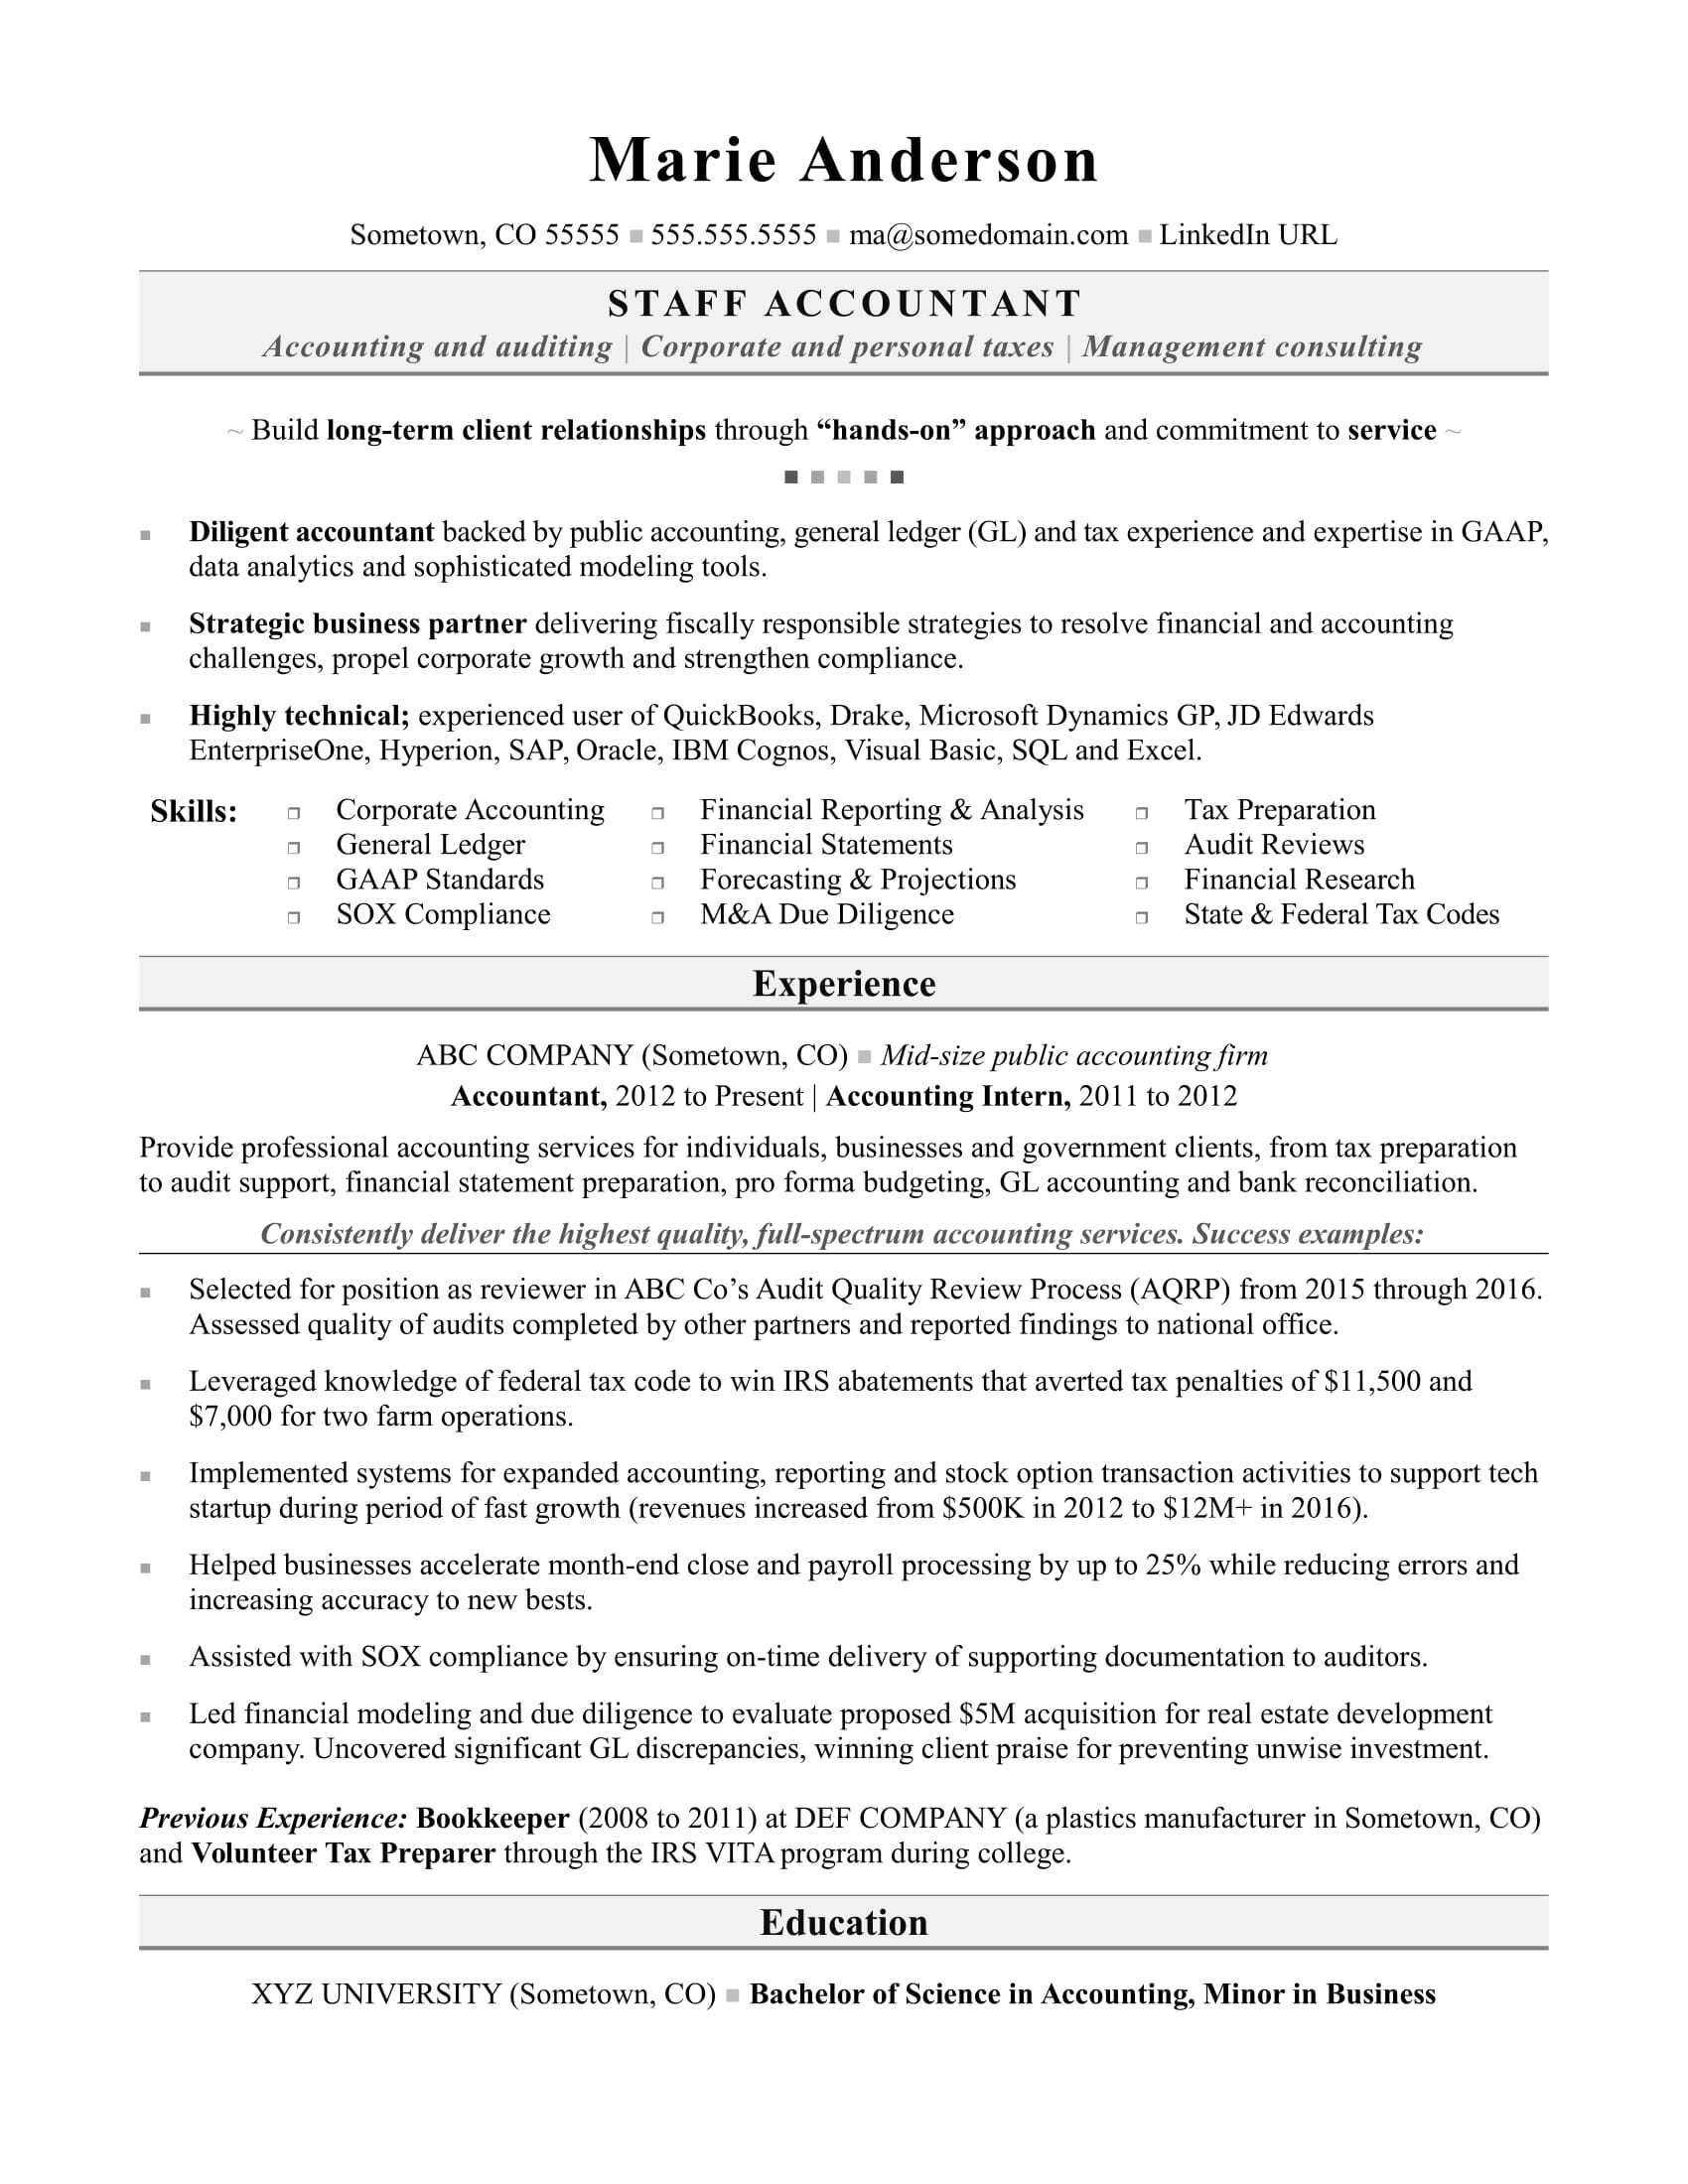 Free Sample Resume for An Accountant Accountant Resume Monster.com